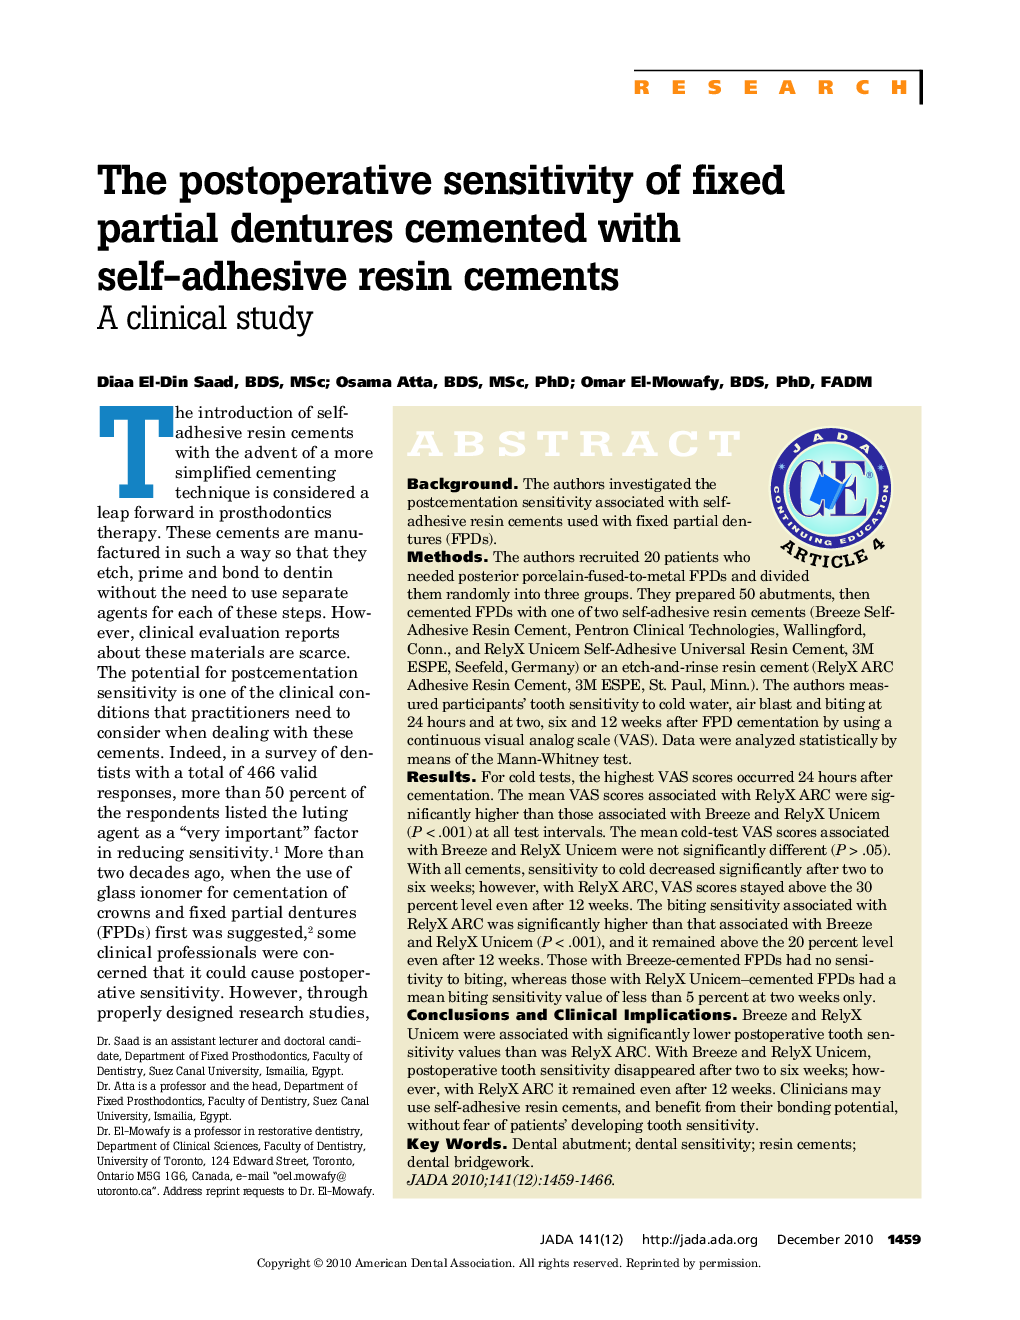 The Postoperative Sensitivity of Fixed Partial Dentures Cemented With Self-Adhesive Resin Cements